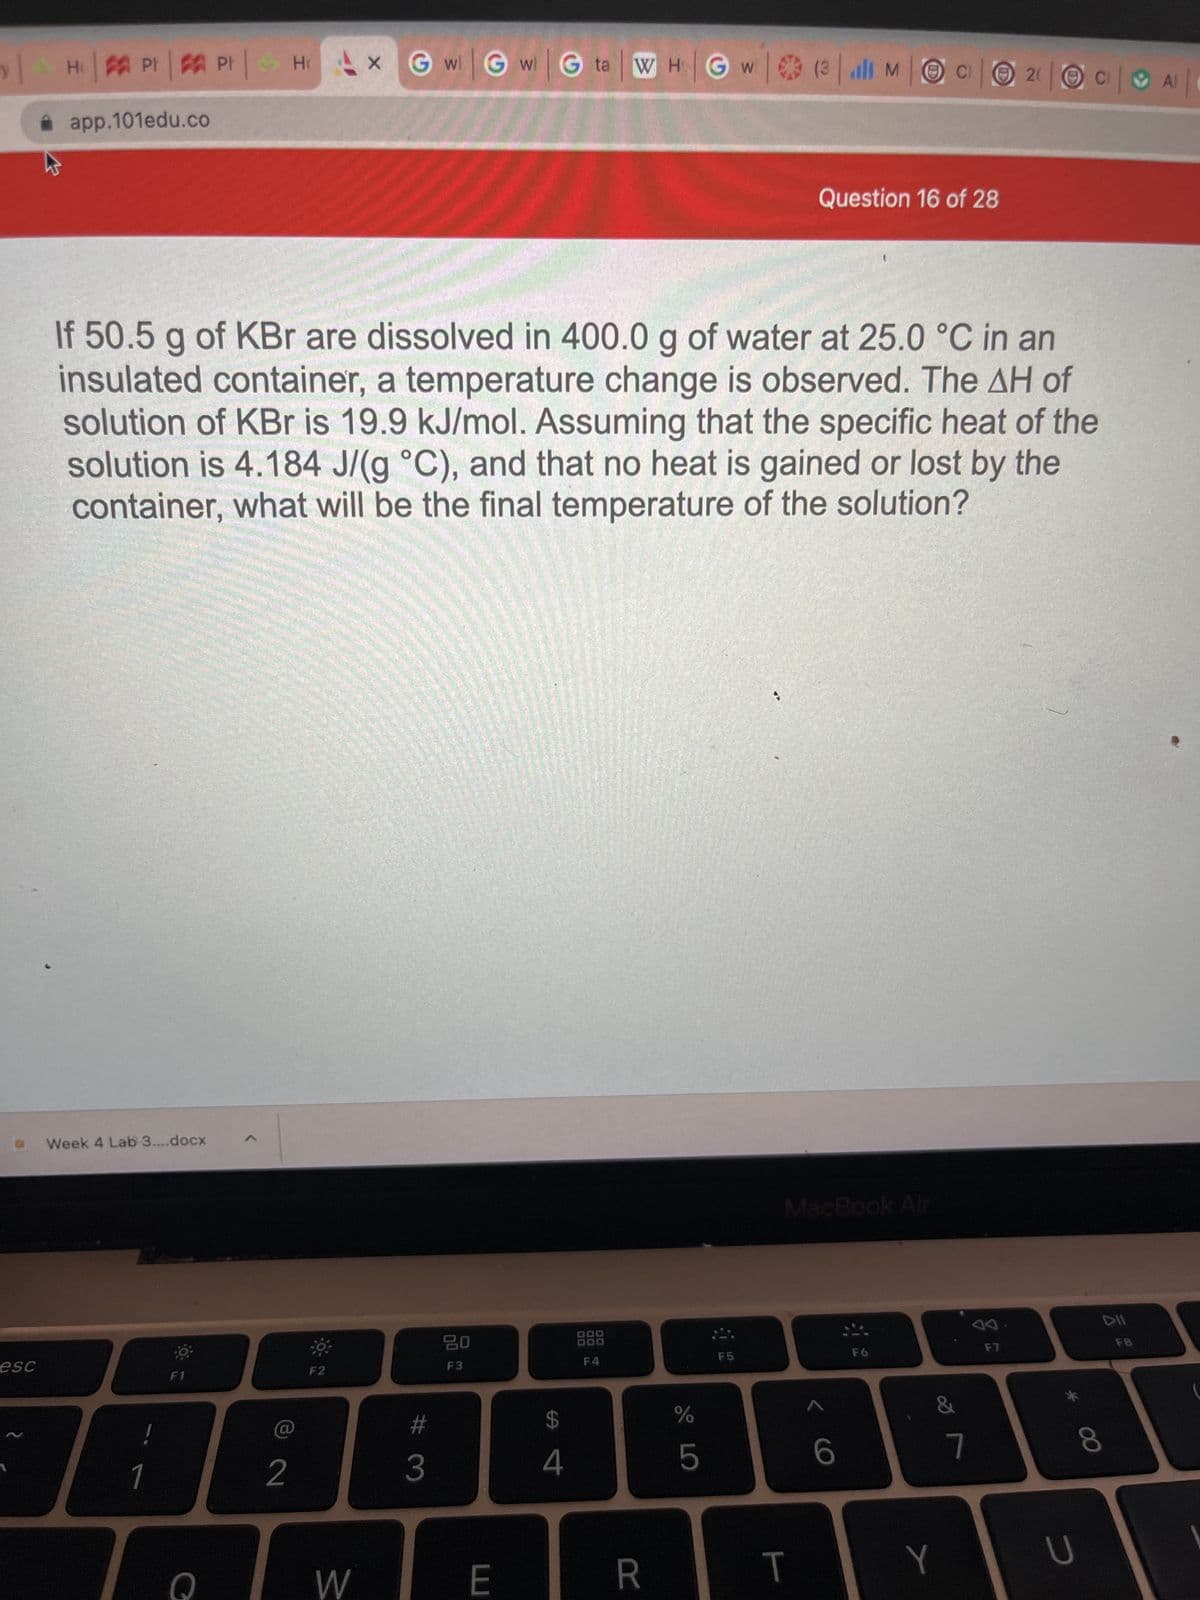 esc
W
Н
H: | PF | Pr | HGwGwGta WHGW (3 il MOC2 |O|A|
app.101edu.co
Week 4 Lab 3....docx
If 50.5 g of KBr are dissolved in 400.0 g of water at 25.0 °C in an
insulated container, a temperature change is observed. The AH of
solution of KBr is 19.9 kJ/mol. Assuming that the specific heat of the
solution is 4.184 J/(g °C), and that no heat is gained or lost by the
container, what will be the final temperature of the solution?
1
F1
Q
2
F2
W
3
20
F3
W
E
की व
4
000
DOO
F4
R
do L
%
5
F5
Question 16 of 28
MacBook Air
T
6
F6
&
Y
7
F7
U
DII
8
FB